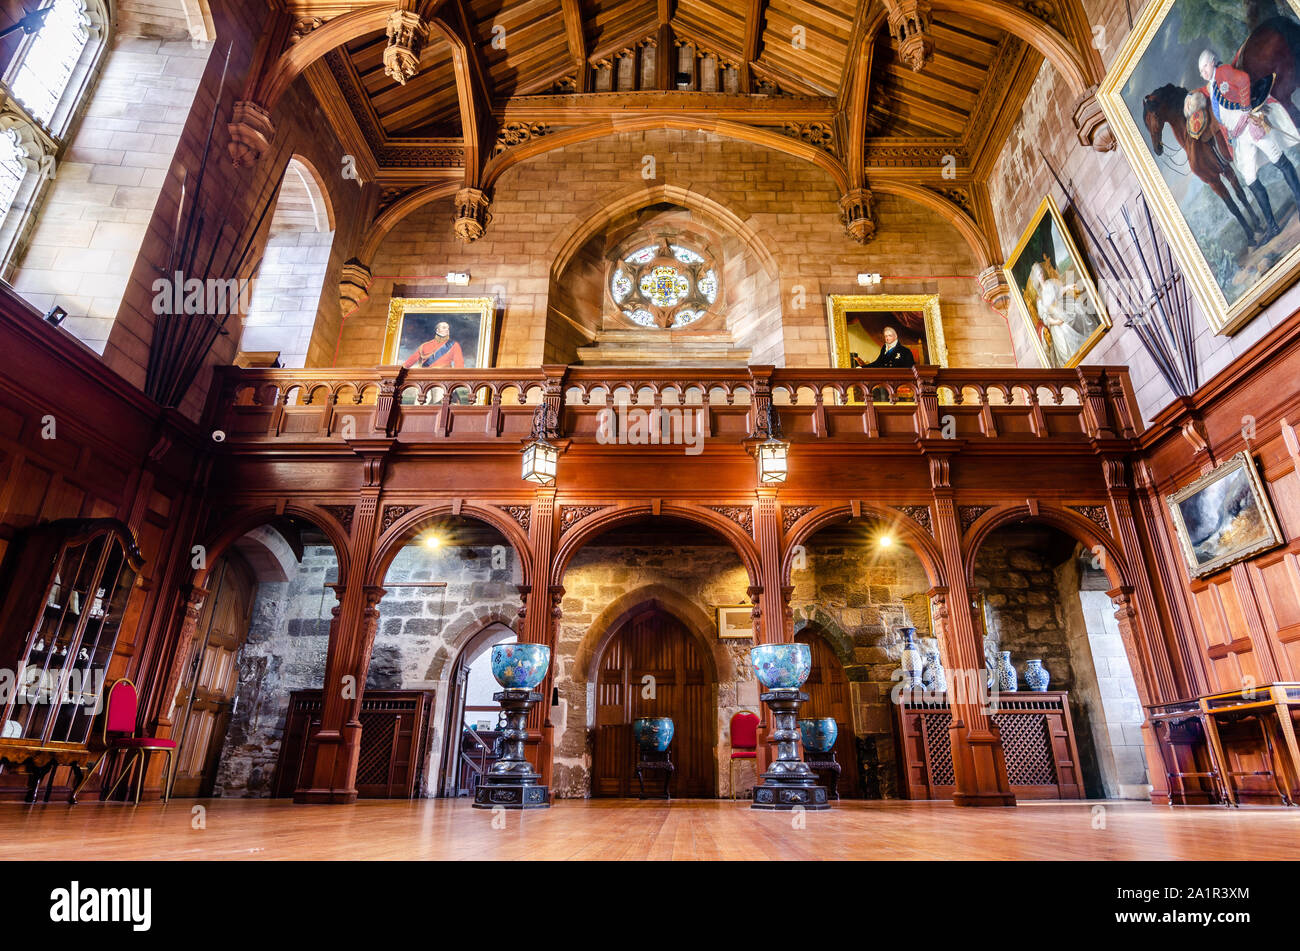 Long exposure of the interior of the King’s Hall of Bamburgh Castle in Northumberland, UK on the 23rd September 2019 Stock Photo